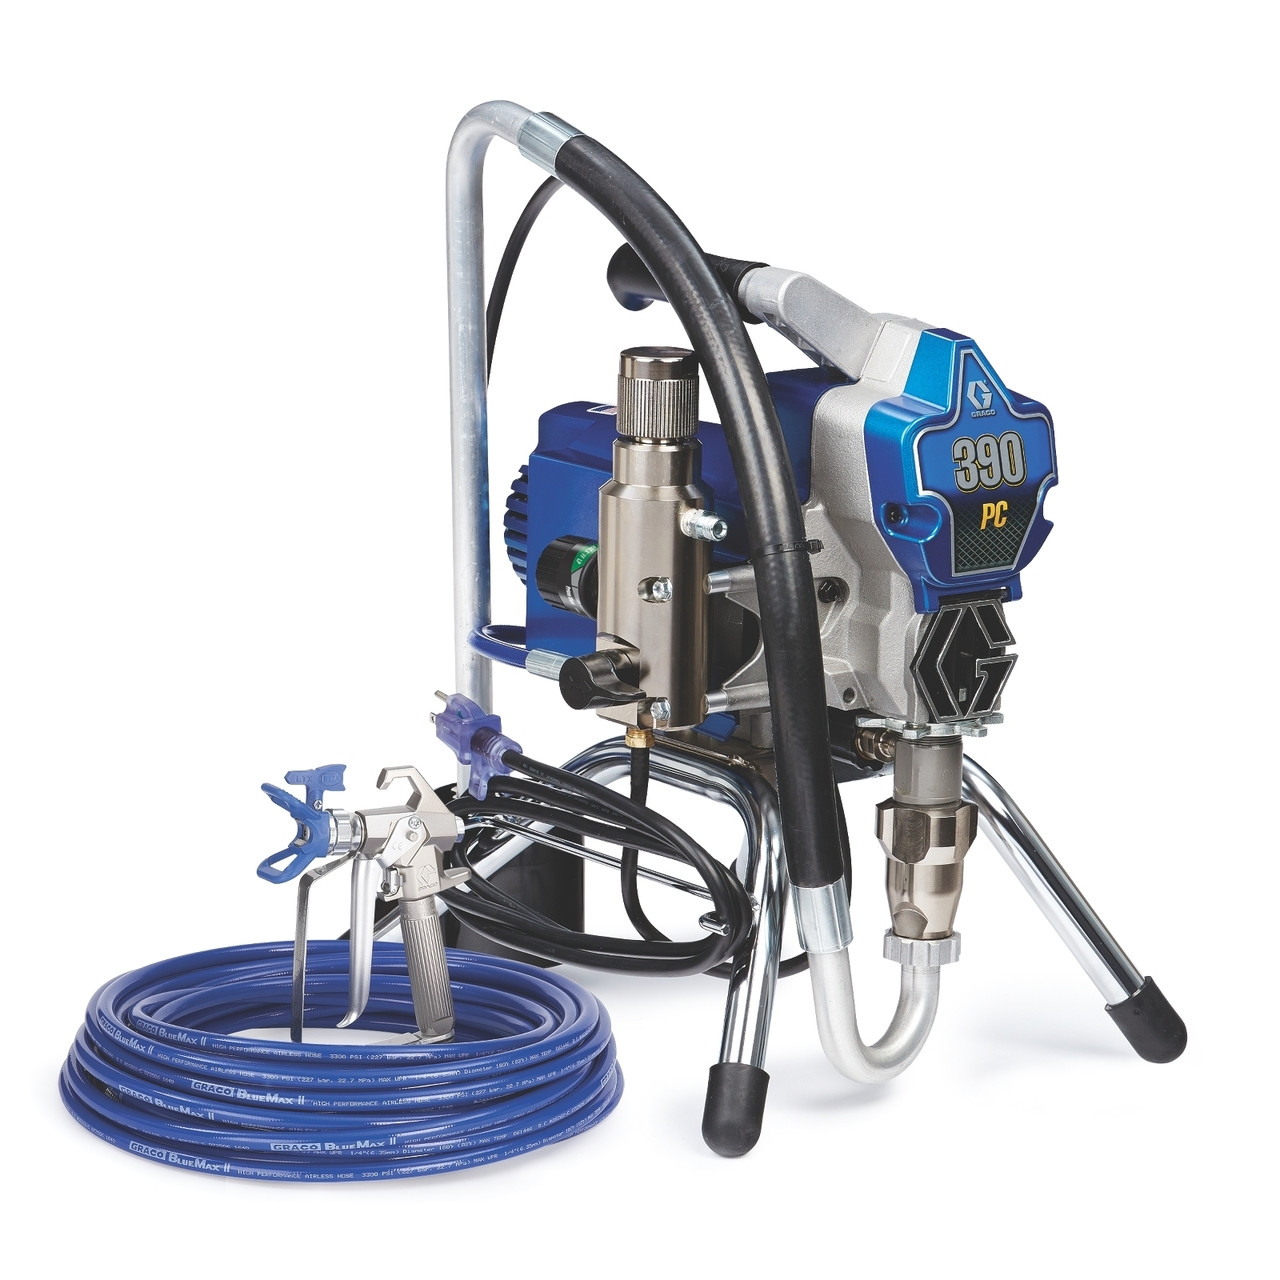 Graco 390 PC Cordless Airless Sprayer, Stand 25T804